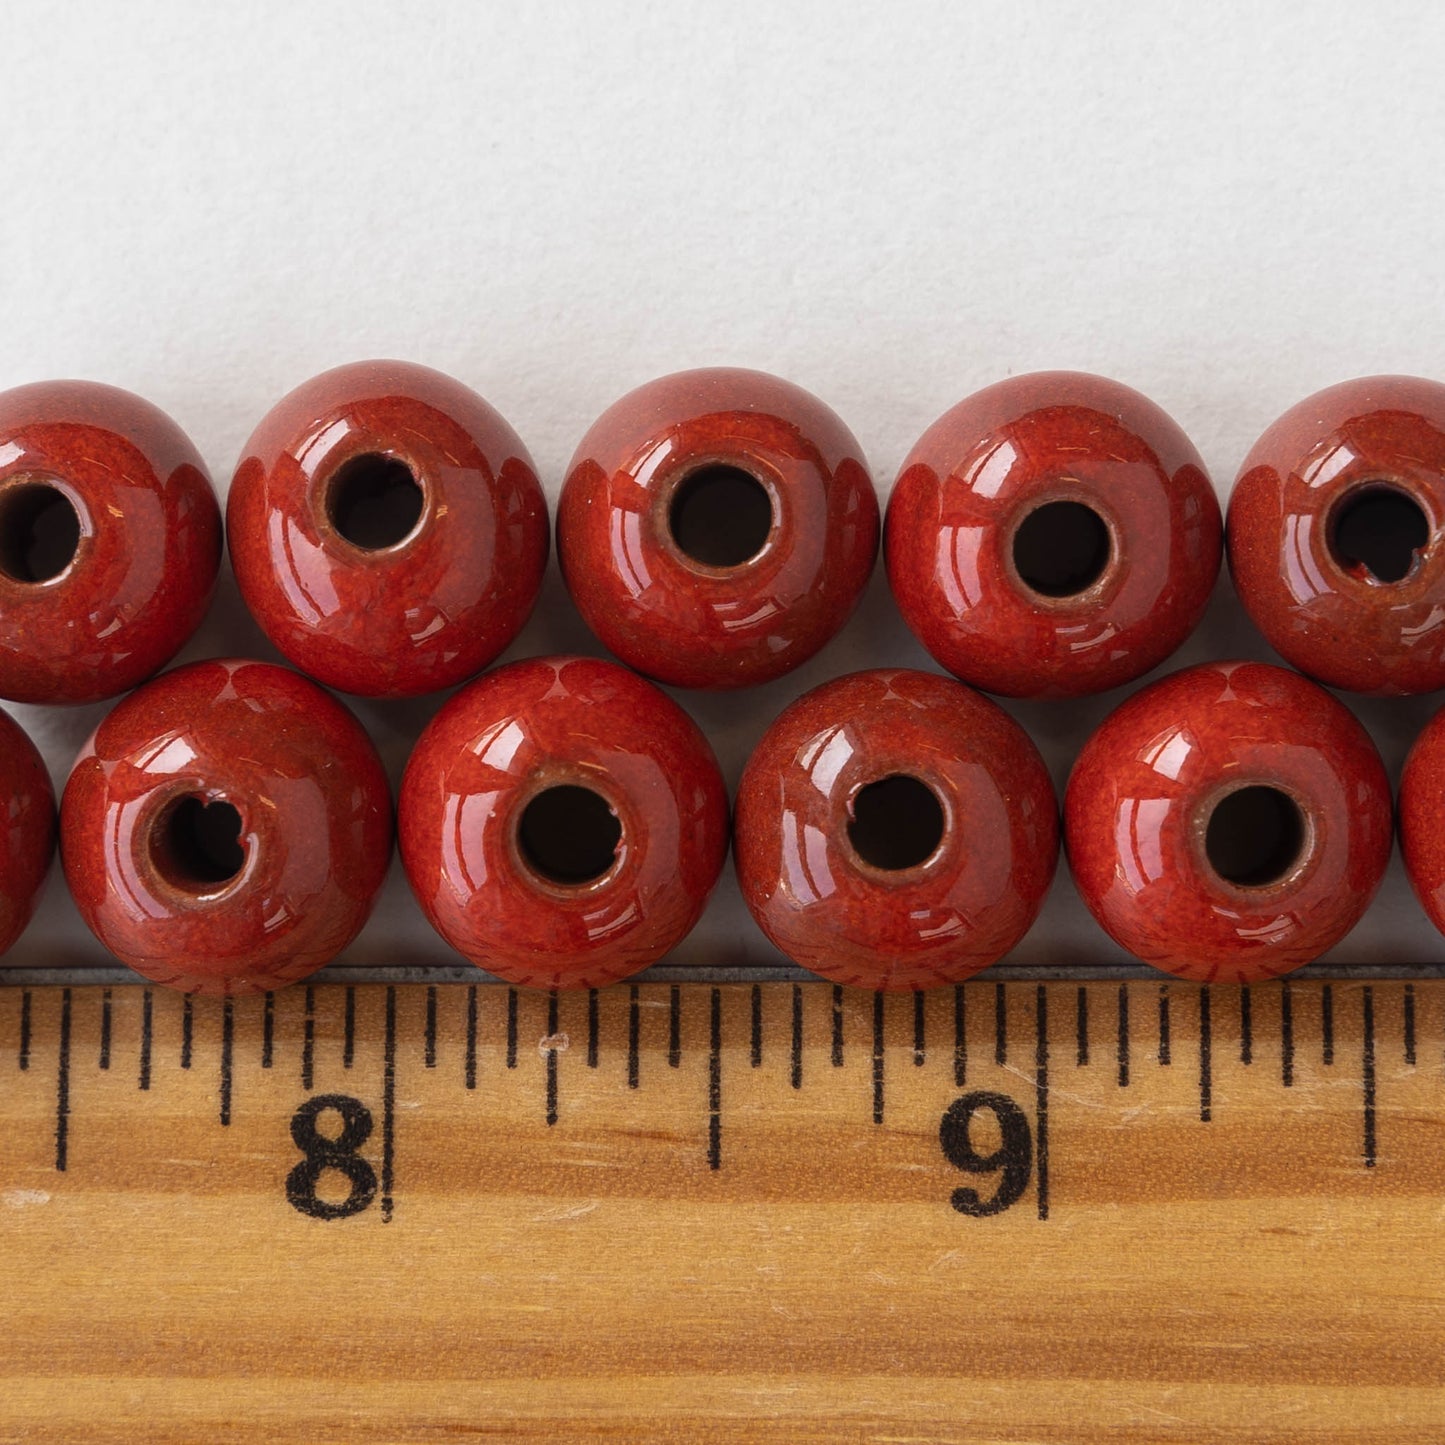 Load image into Gallery viewer, 13mm Glazed CeramicRound Beads - Opaque Crimson Red - 6 or 18
